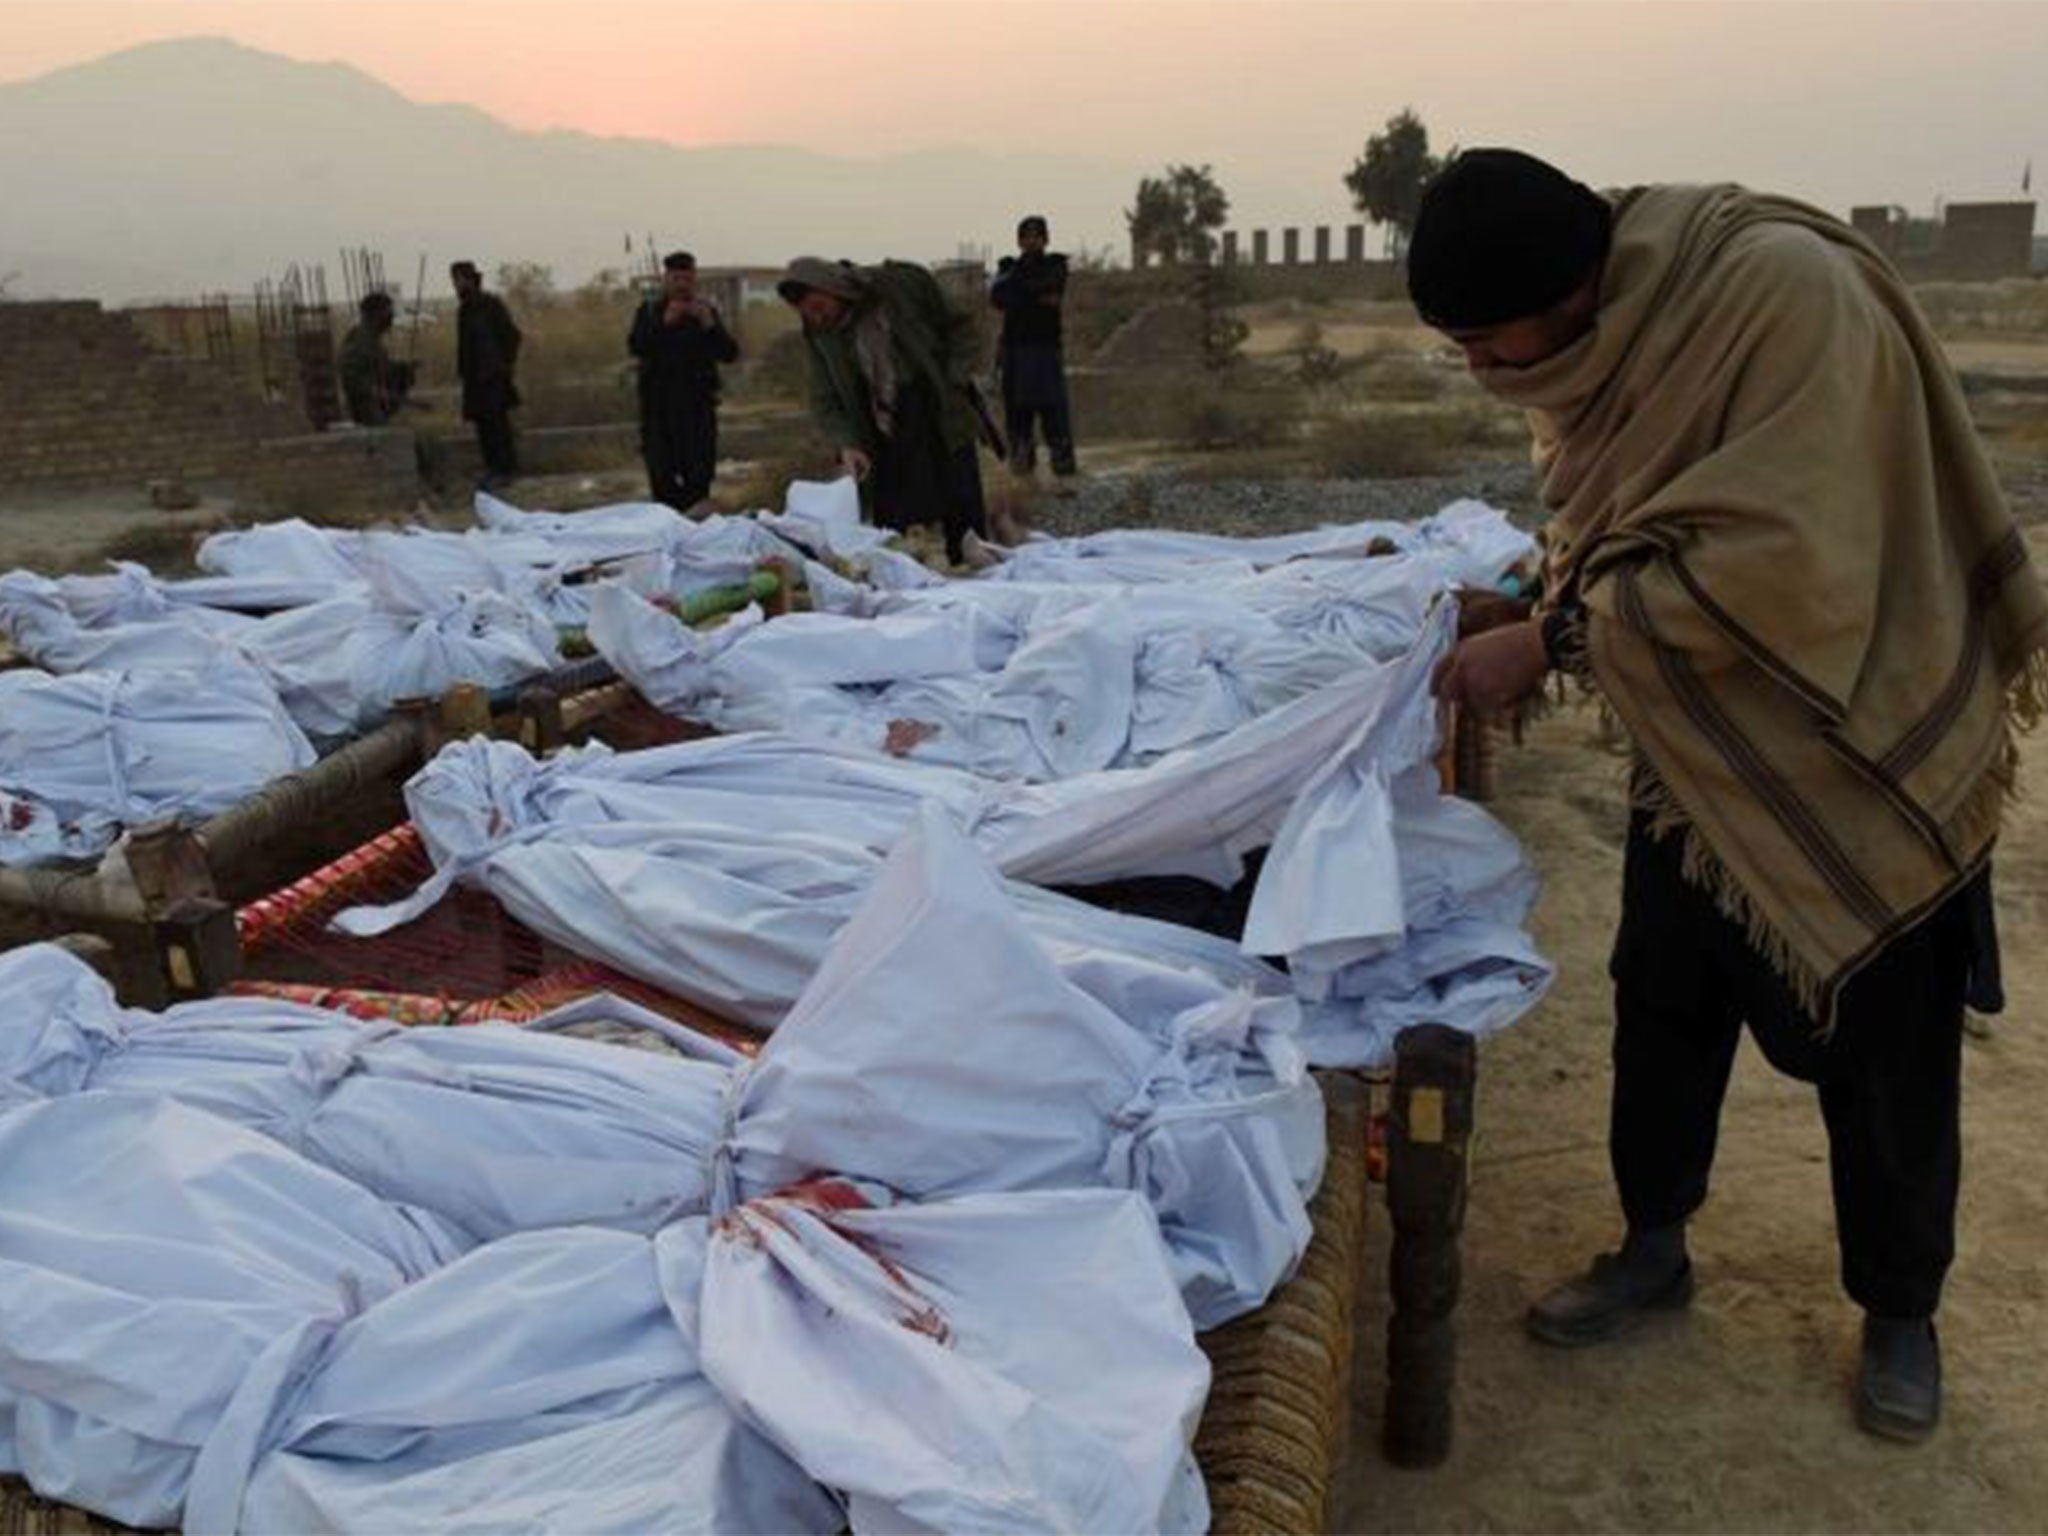 A Pakistani Frontier Corps member looks at gathered bodies of militants killed in a military operation in Tirah, near the Pakistan-Afghanistan border, on 19 December as operations against insurgents intensify in the wake of the Peshawar school massacre